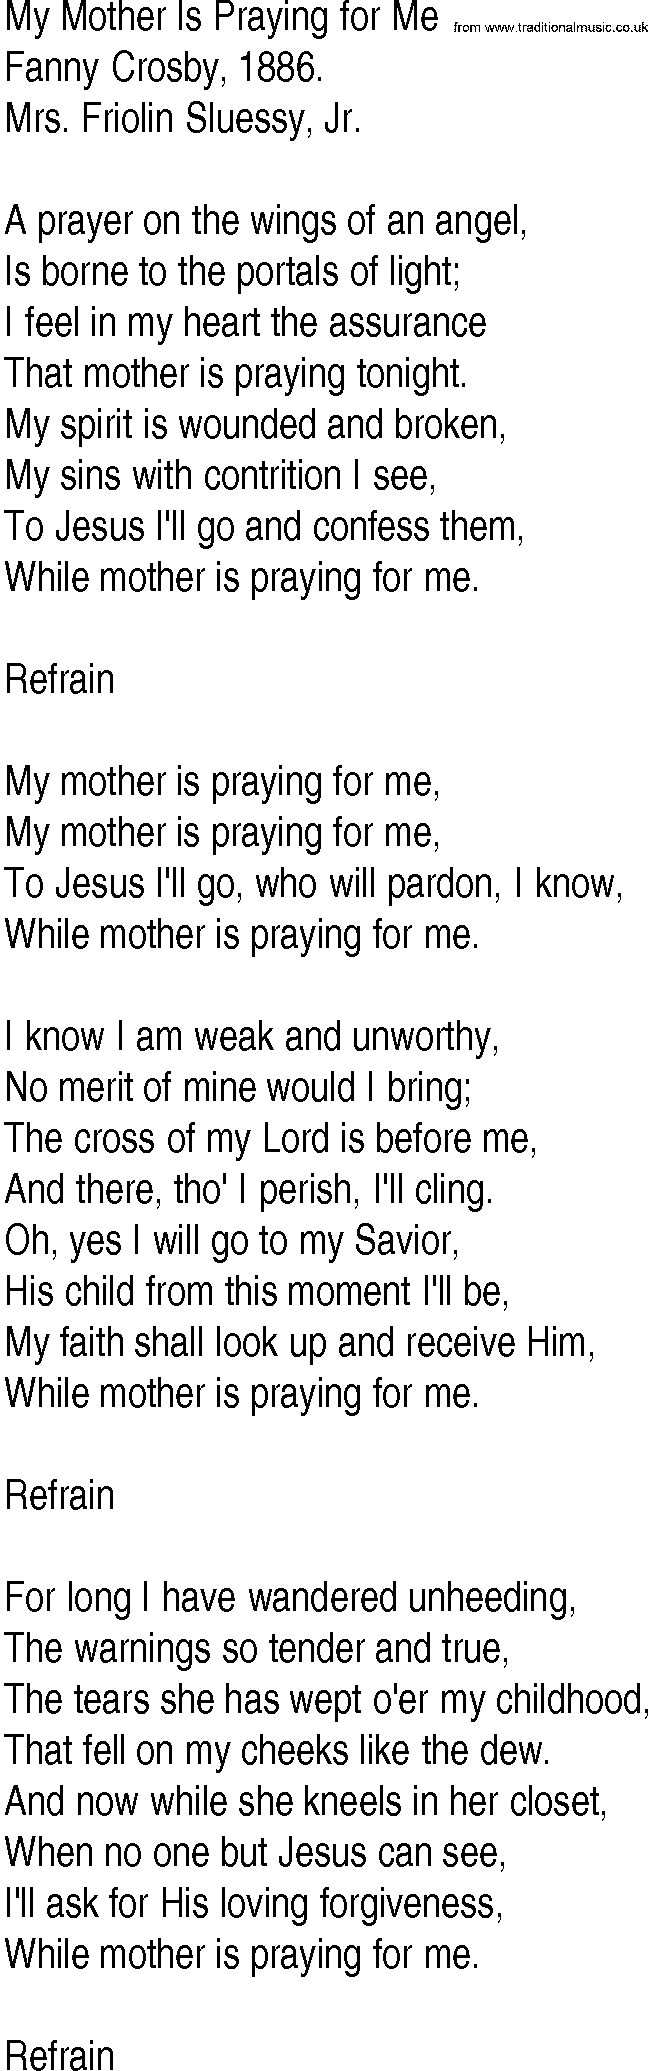 Hymn and Gospel Song: My Mother Is Praying for Me by Fanny Crosby lyrics